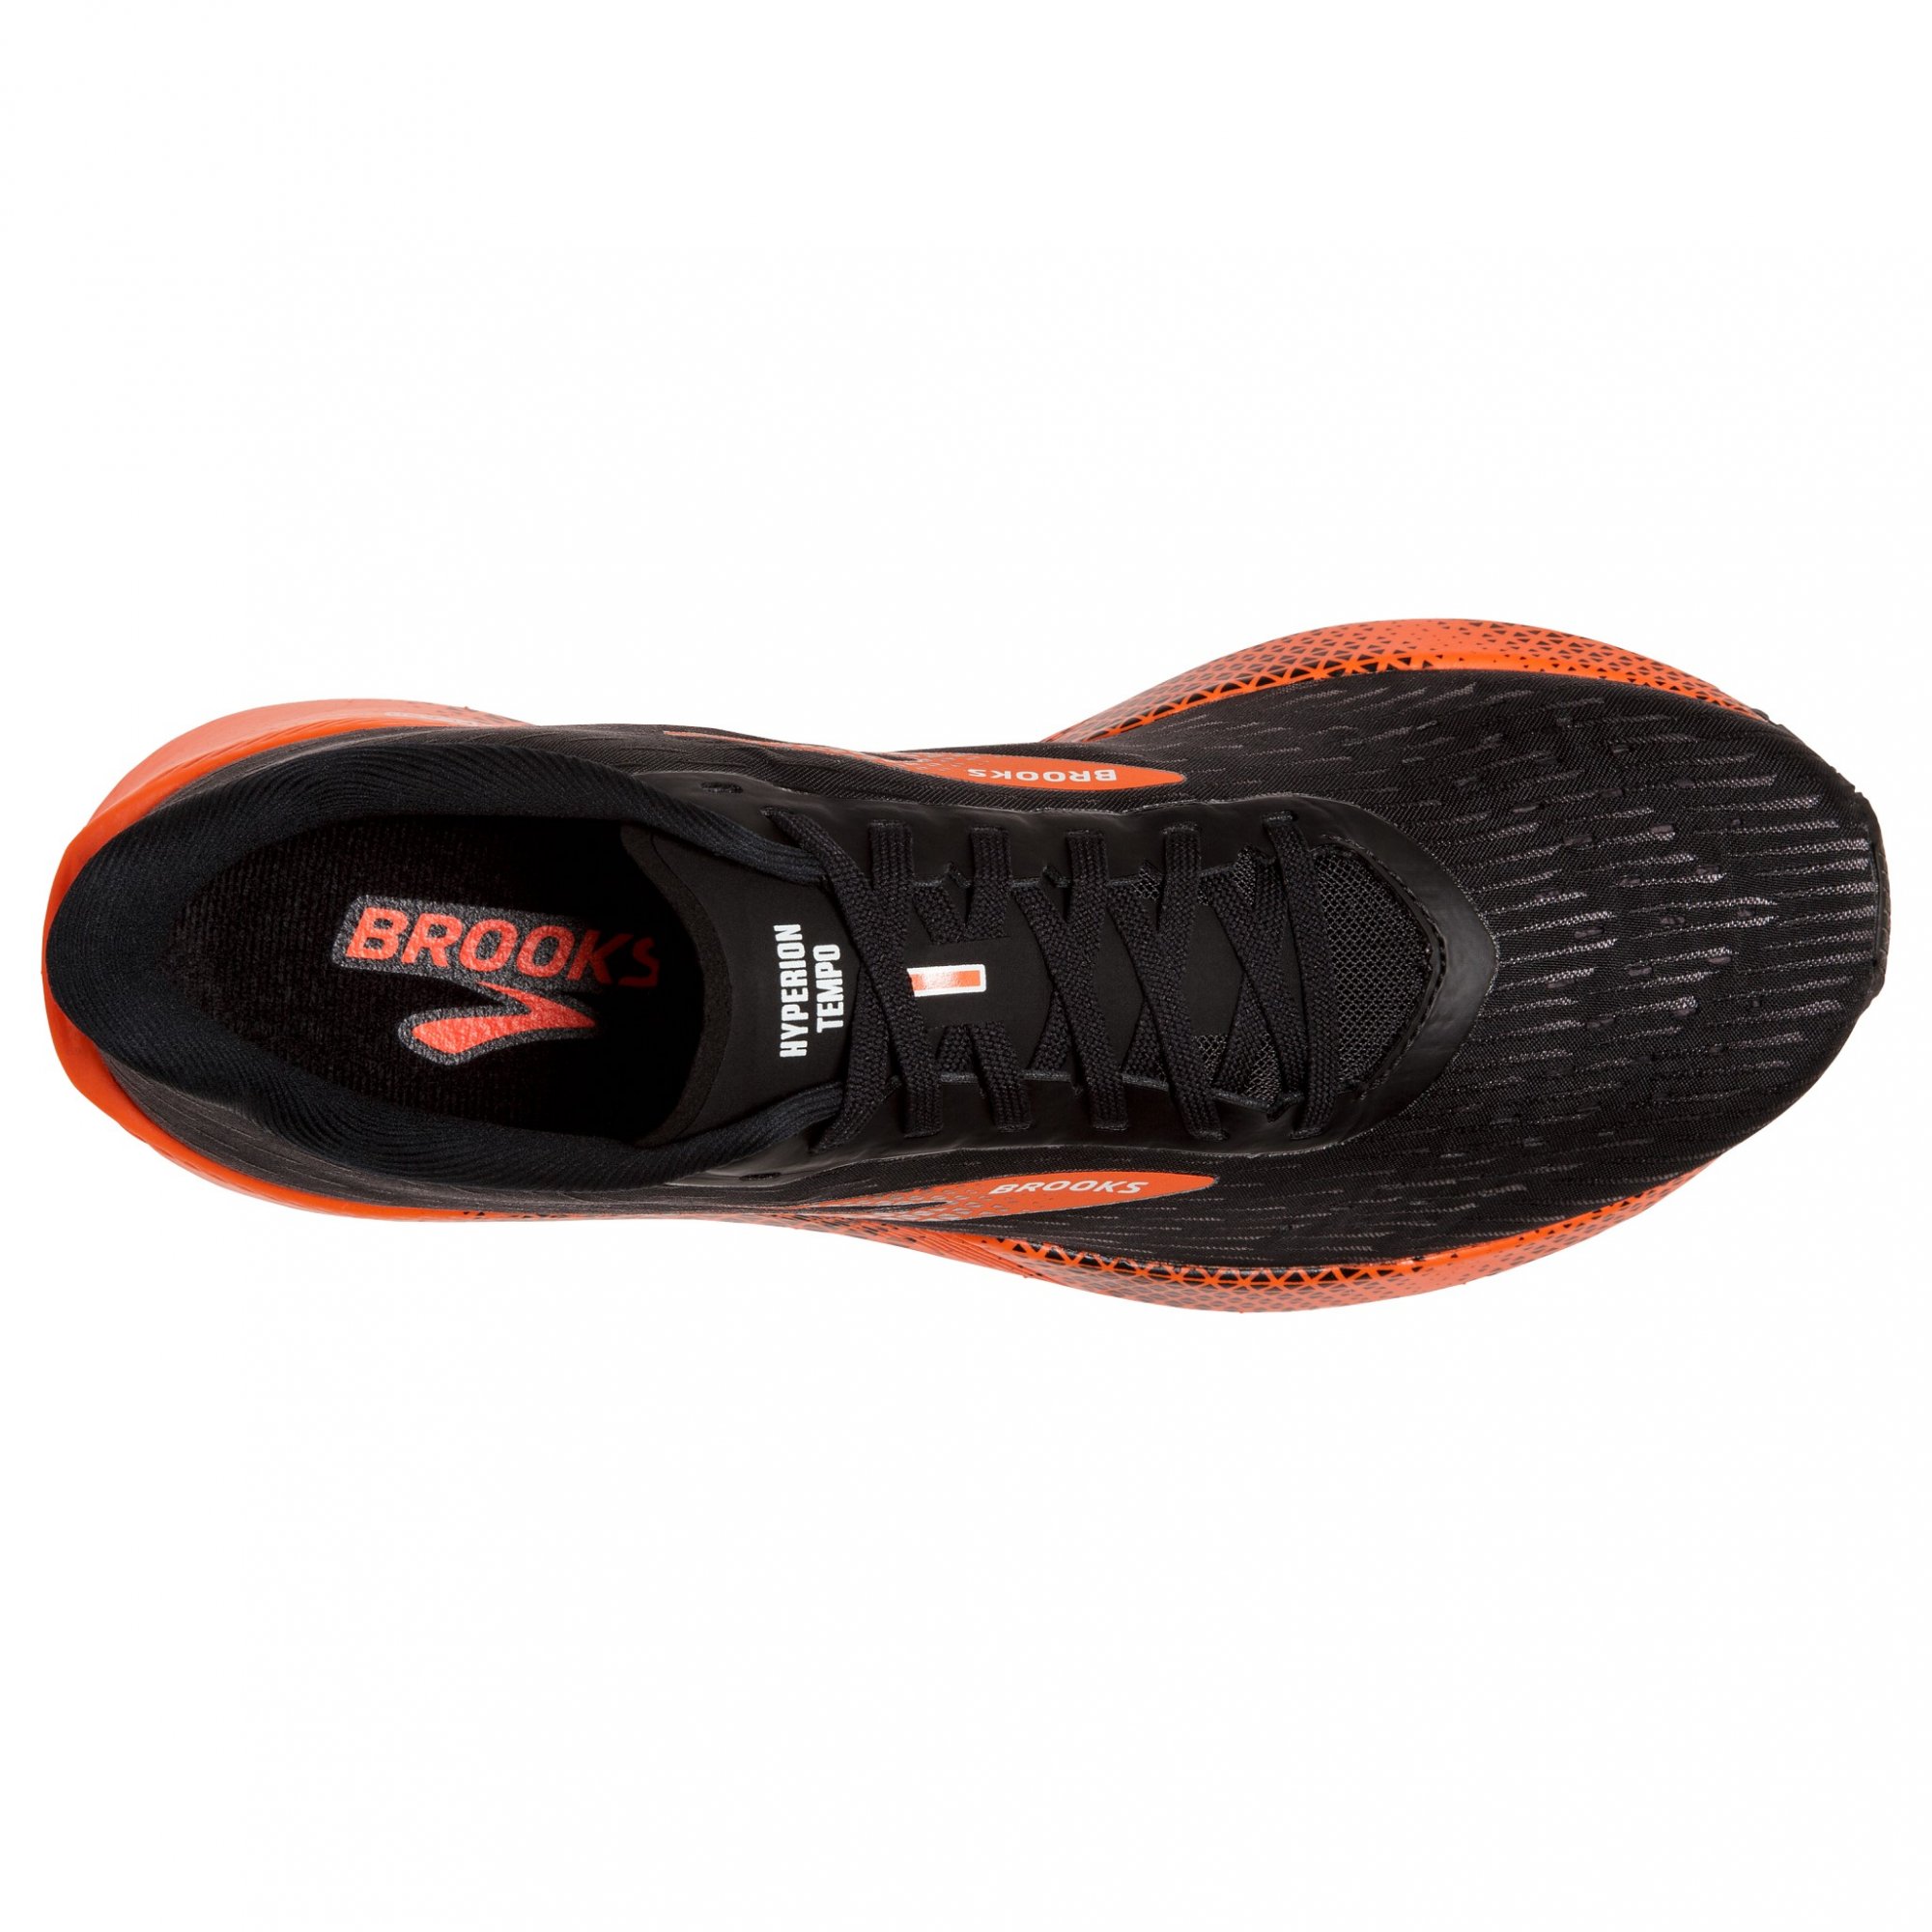 BROOKS Hyperion Tempo Black/Flame/Grey